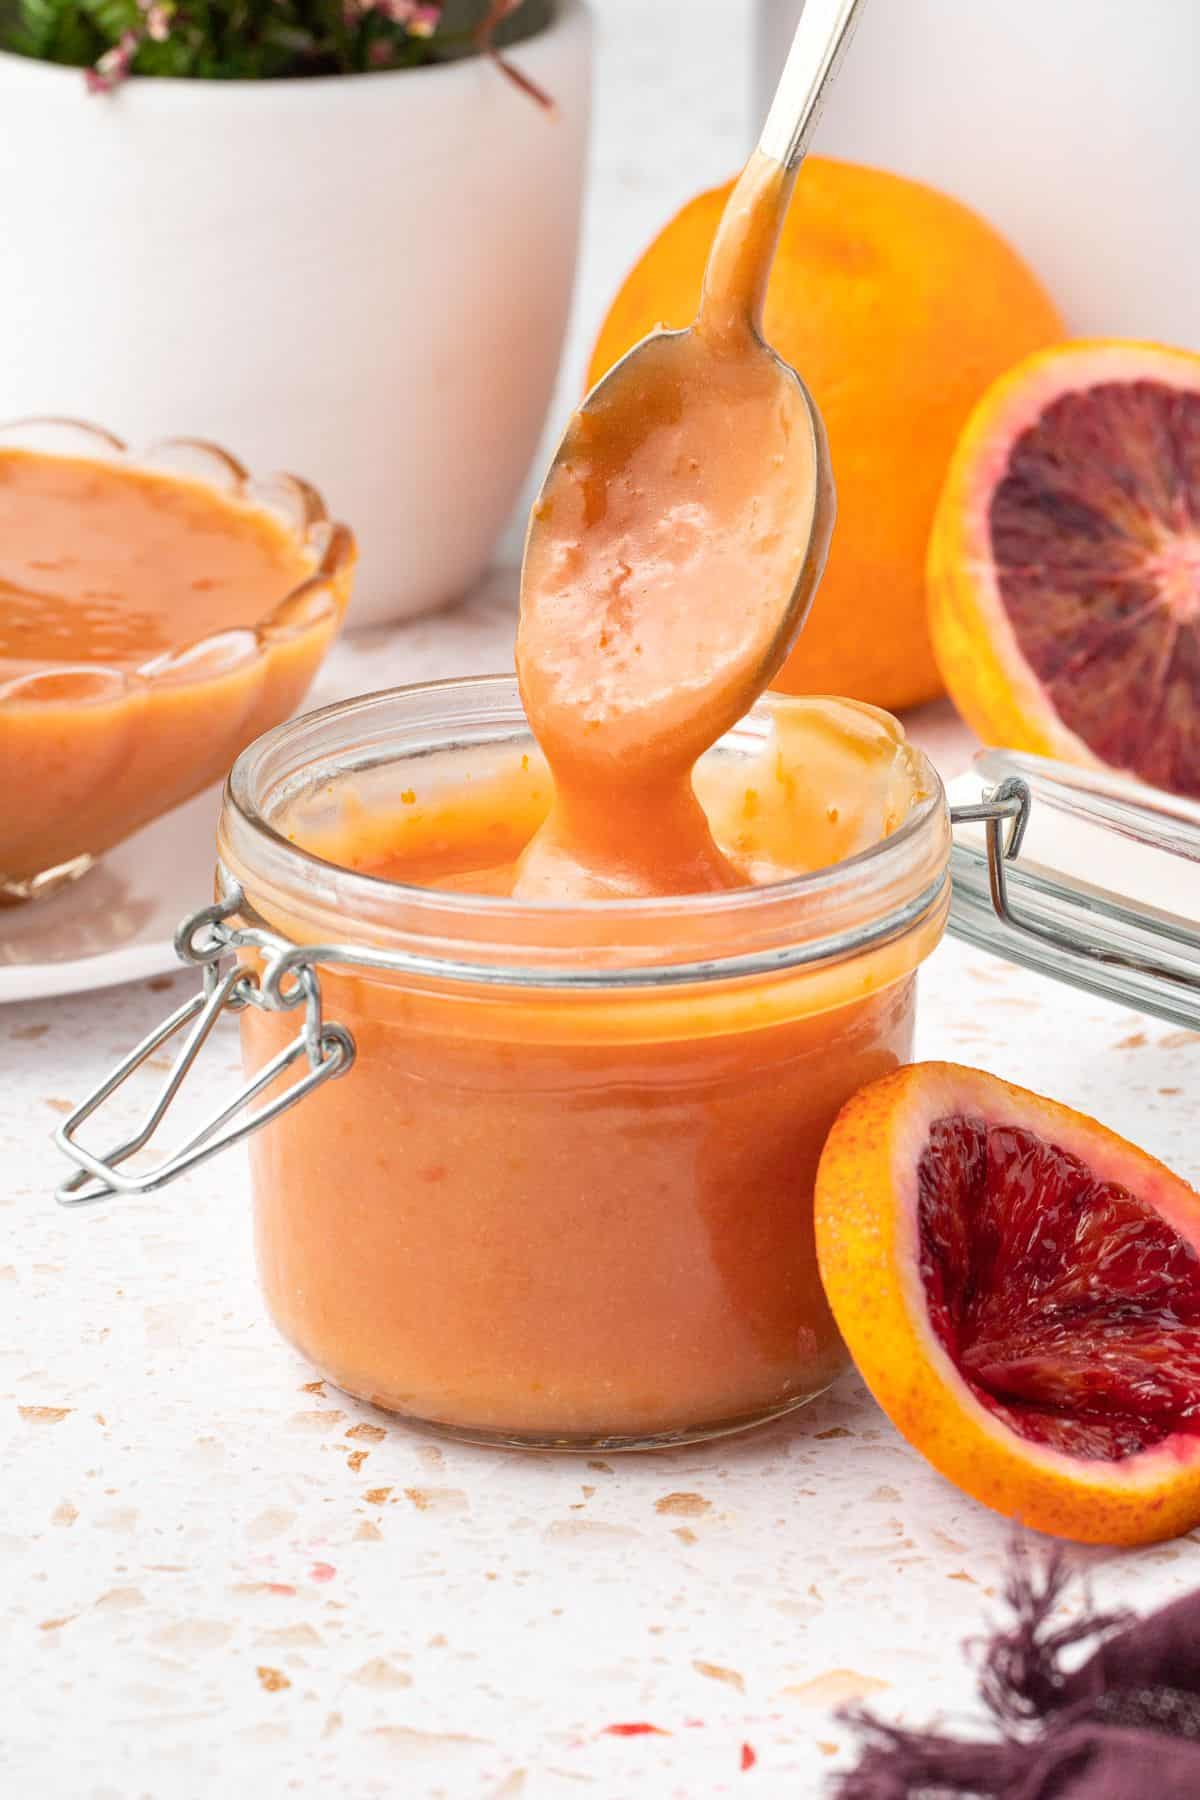 Glass jar of blood orange curd, with a spoon lifting some out.